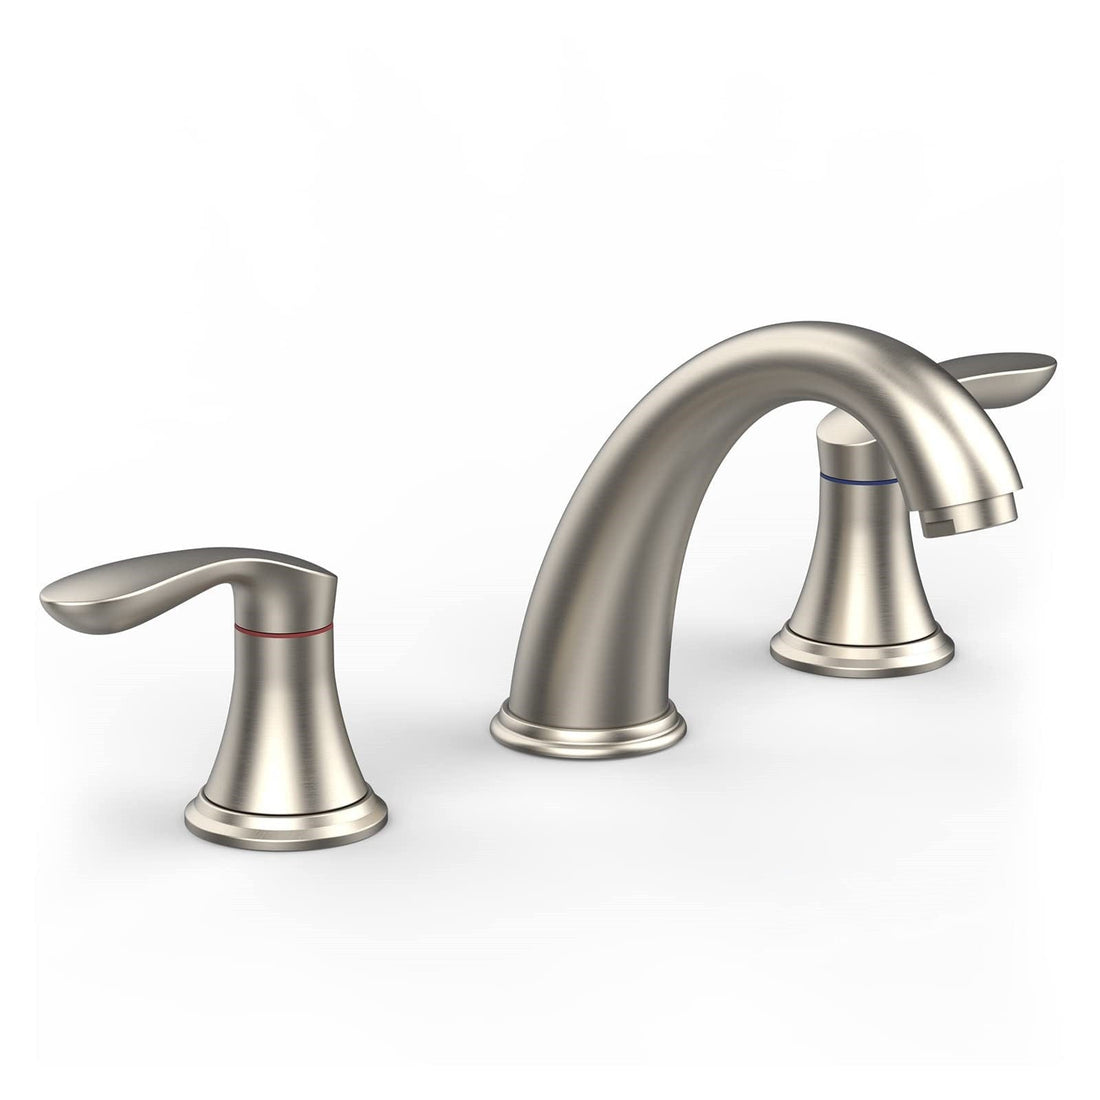 3 Hole Bathroom Sink Faucet, Pop-Up Drain, Hot/Cold Lines(8 Inch 2 Pack / Silver)